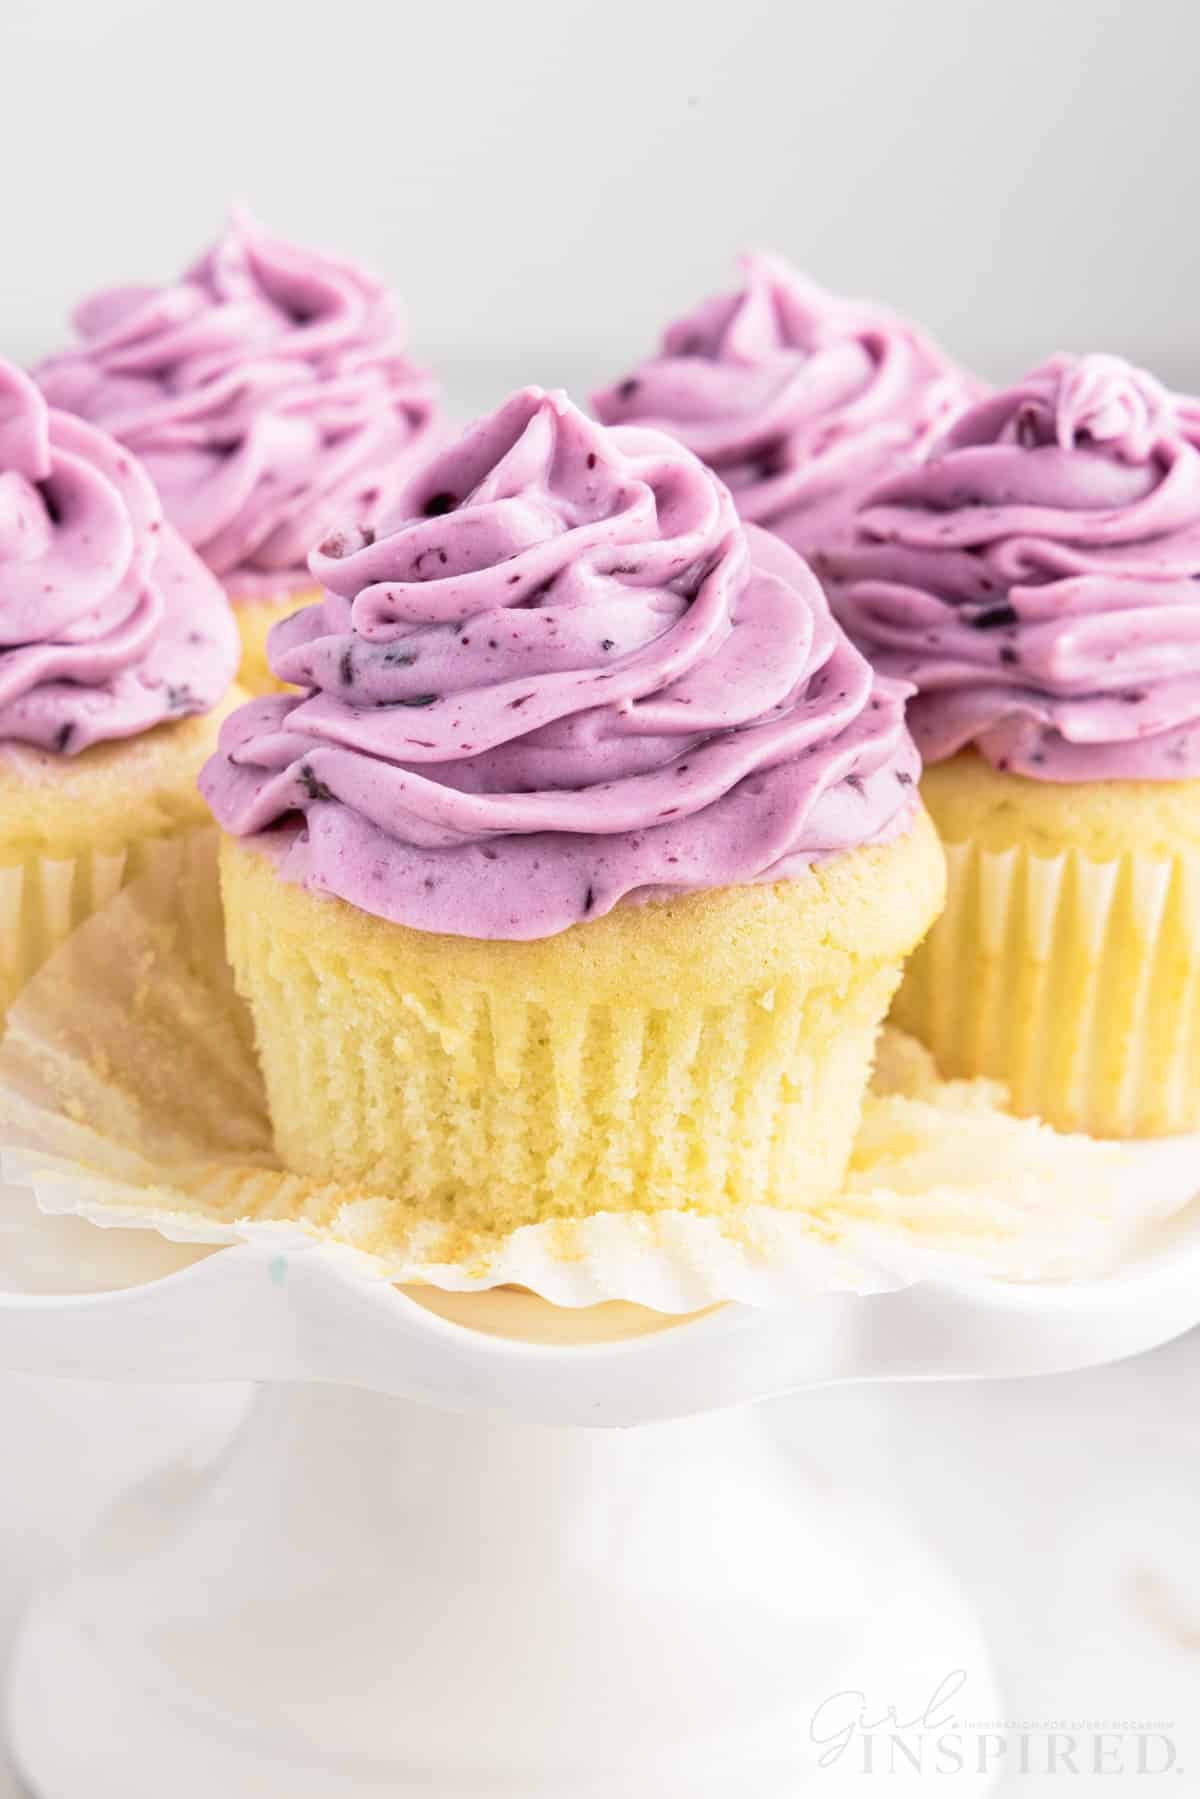 Blueberry Cream Cheese Frosting on cupcakes on a cake stand.